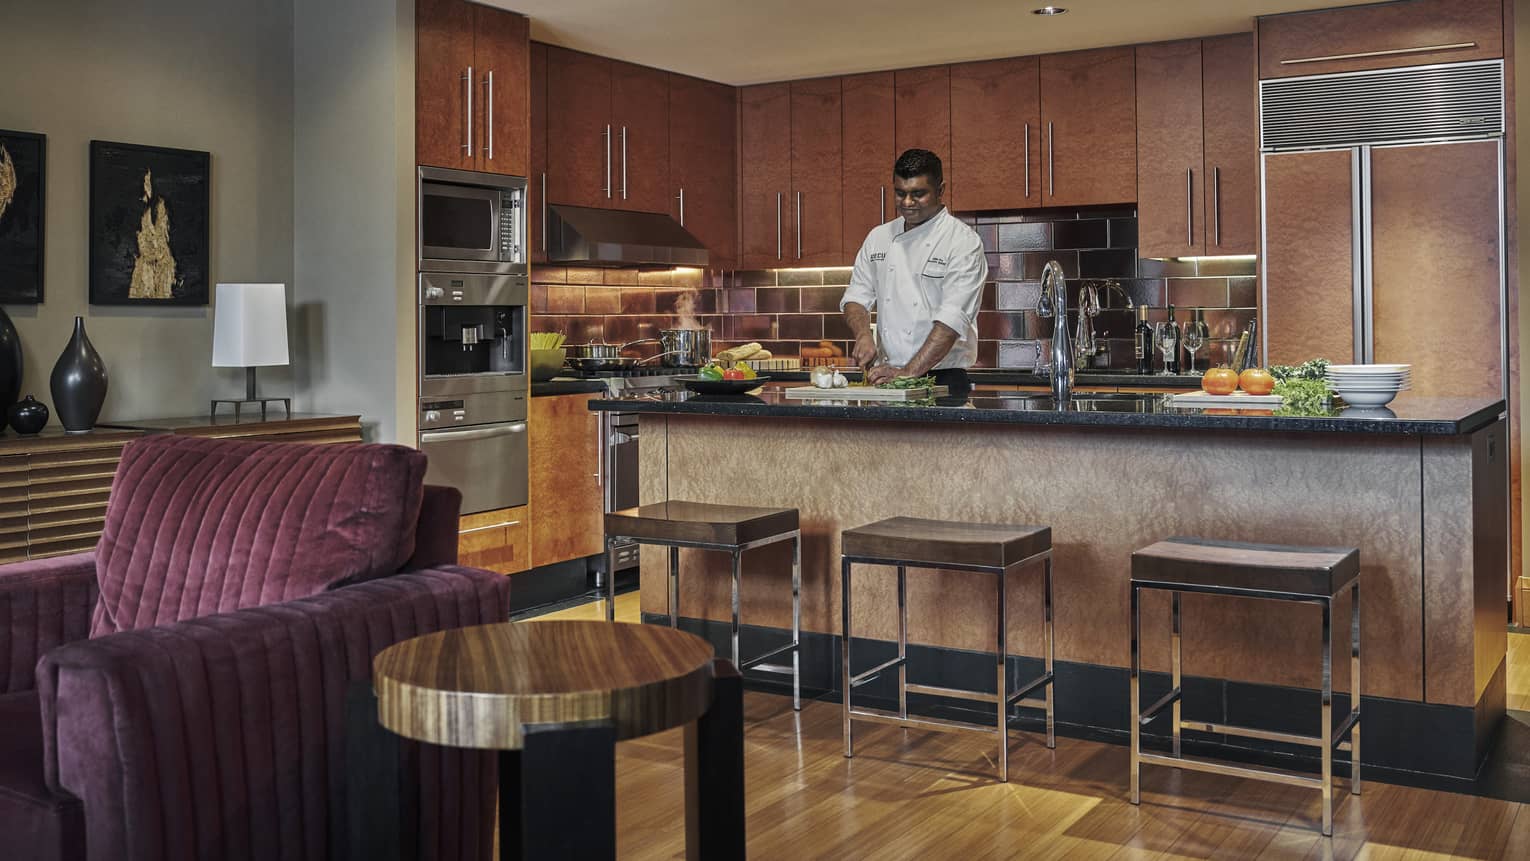 Chef prepares meal in kitchen that overlooks living room